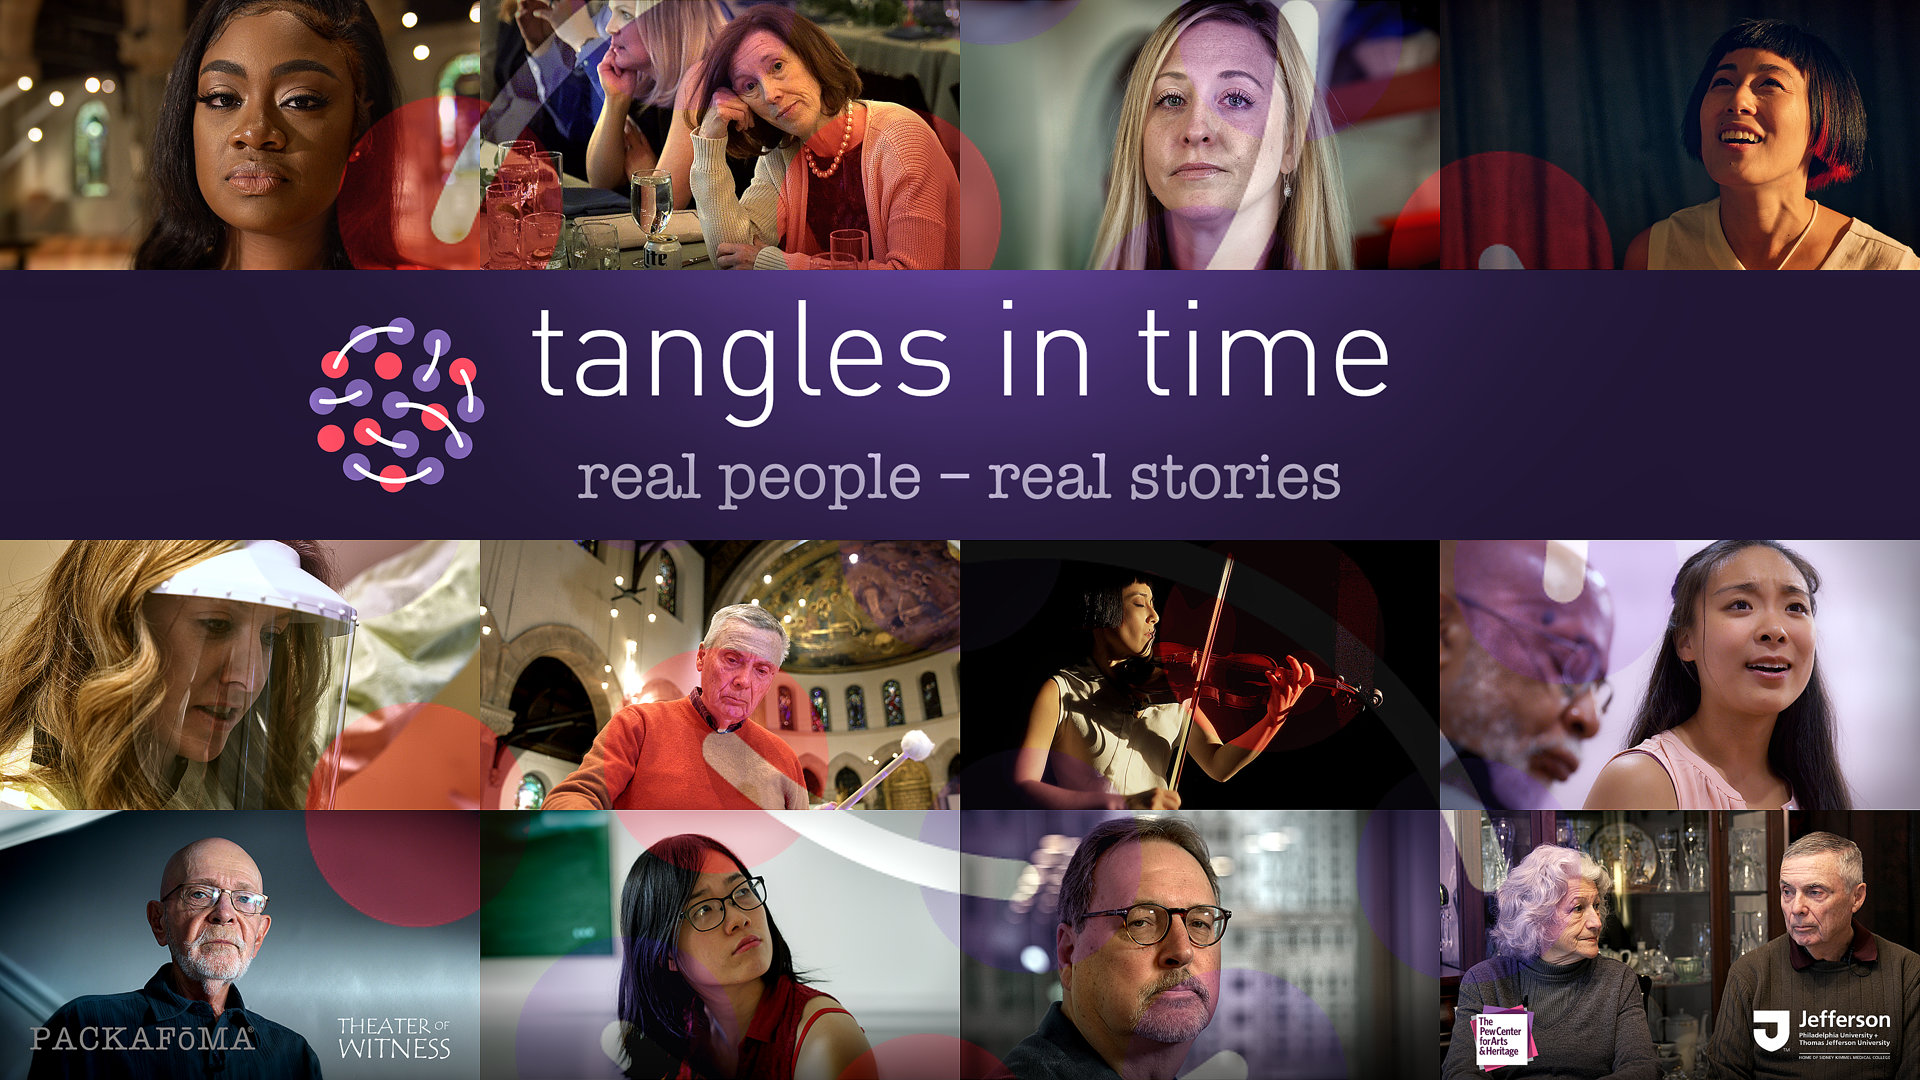 Tangles in Time documentary